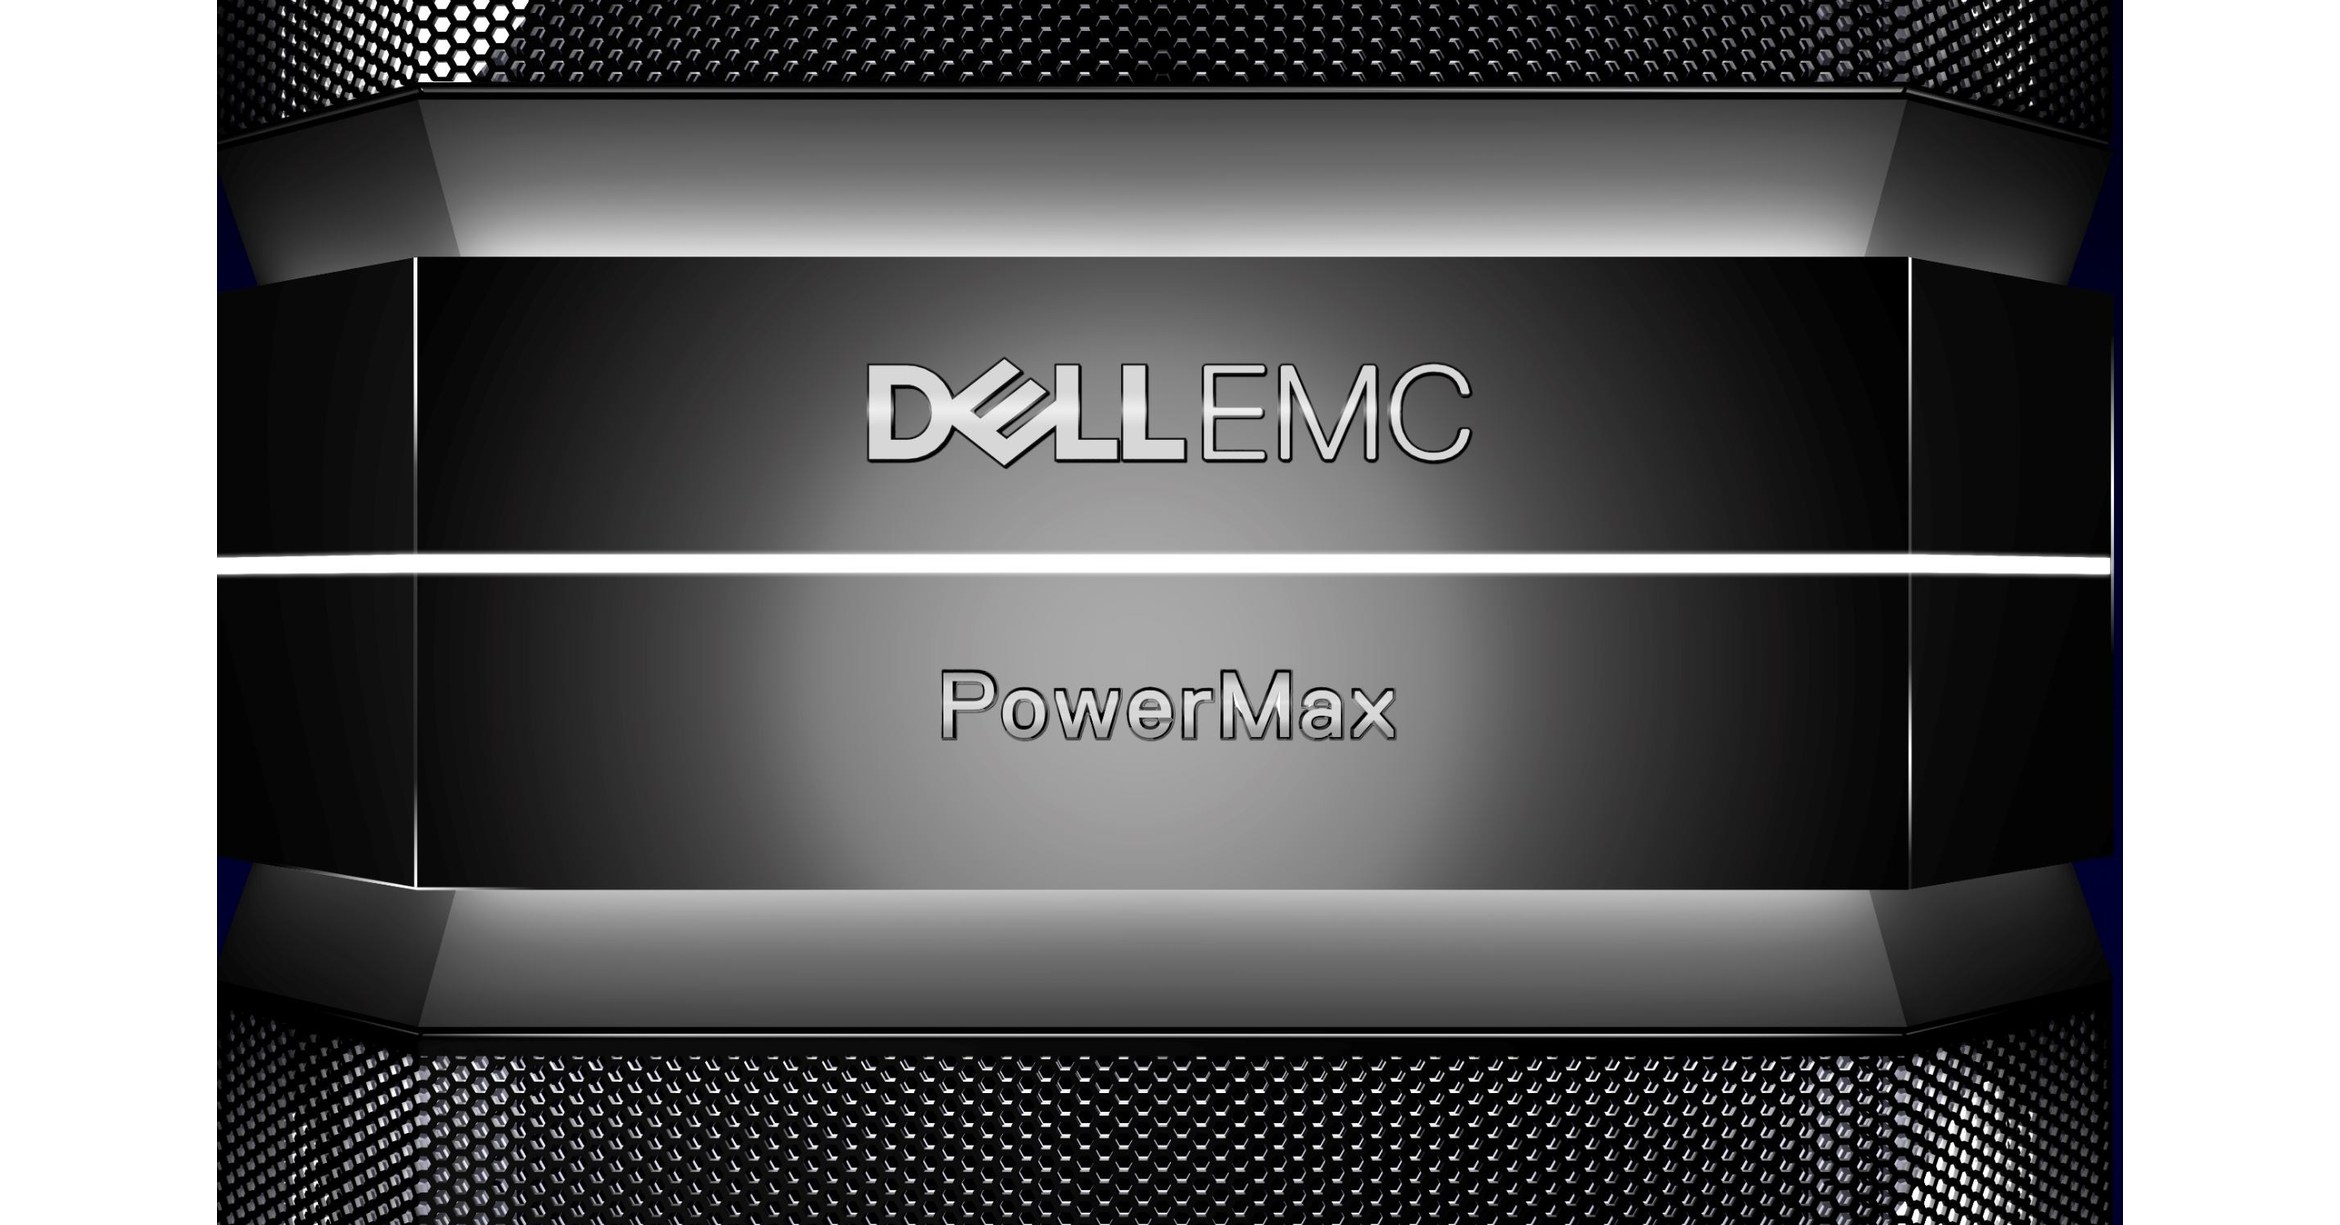 Dell Technologies Powers Up Performance And Efficiency For The Modern Data Center